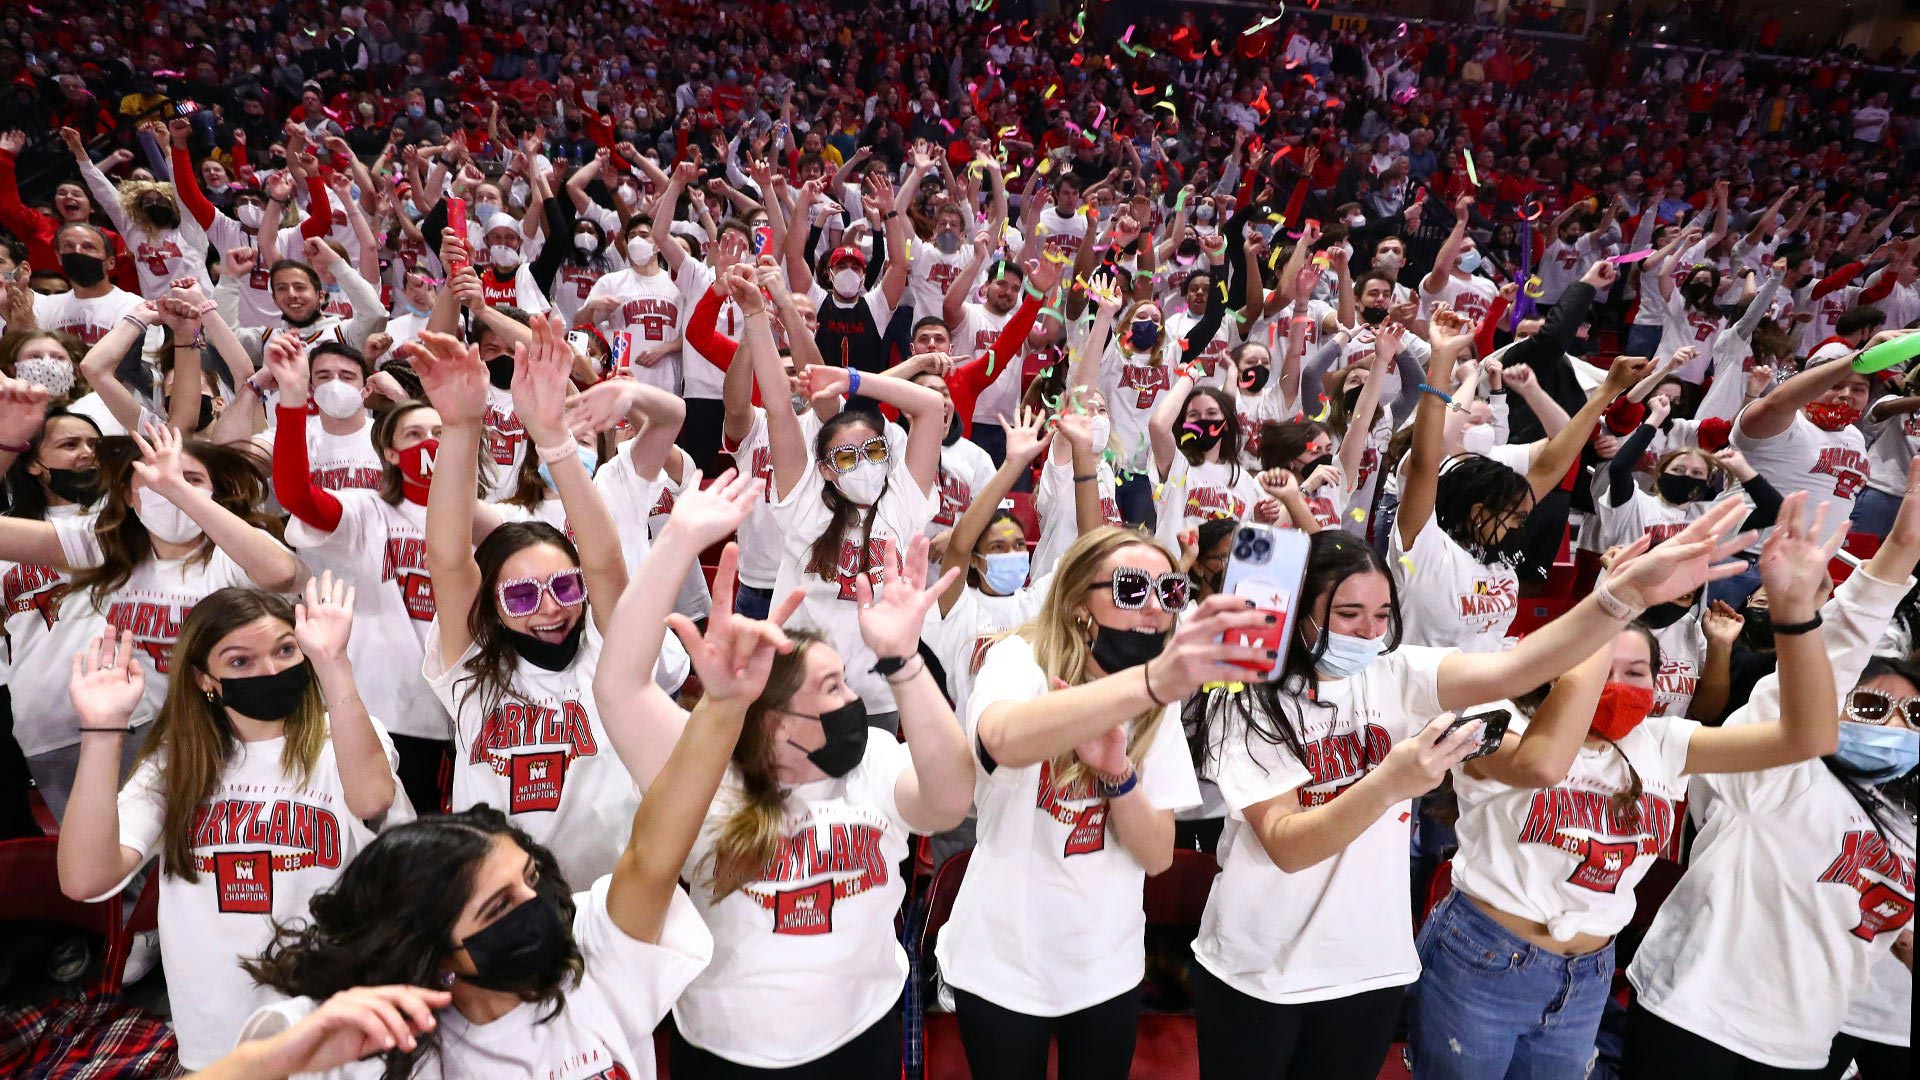 Students pump up the crowd during the 2022 flash mob at the Terp men's basketball game against Ohio State. The annual tradition, choreographed by Megan Piluk '13 and Jen Miller, began in 2013. Photos courtesy of Maryland Athletics.